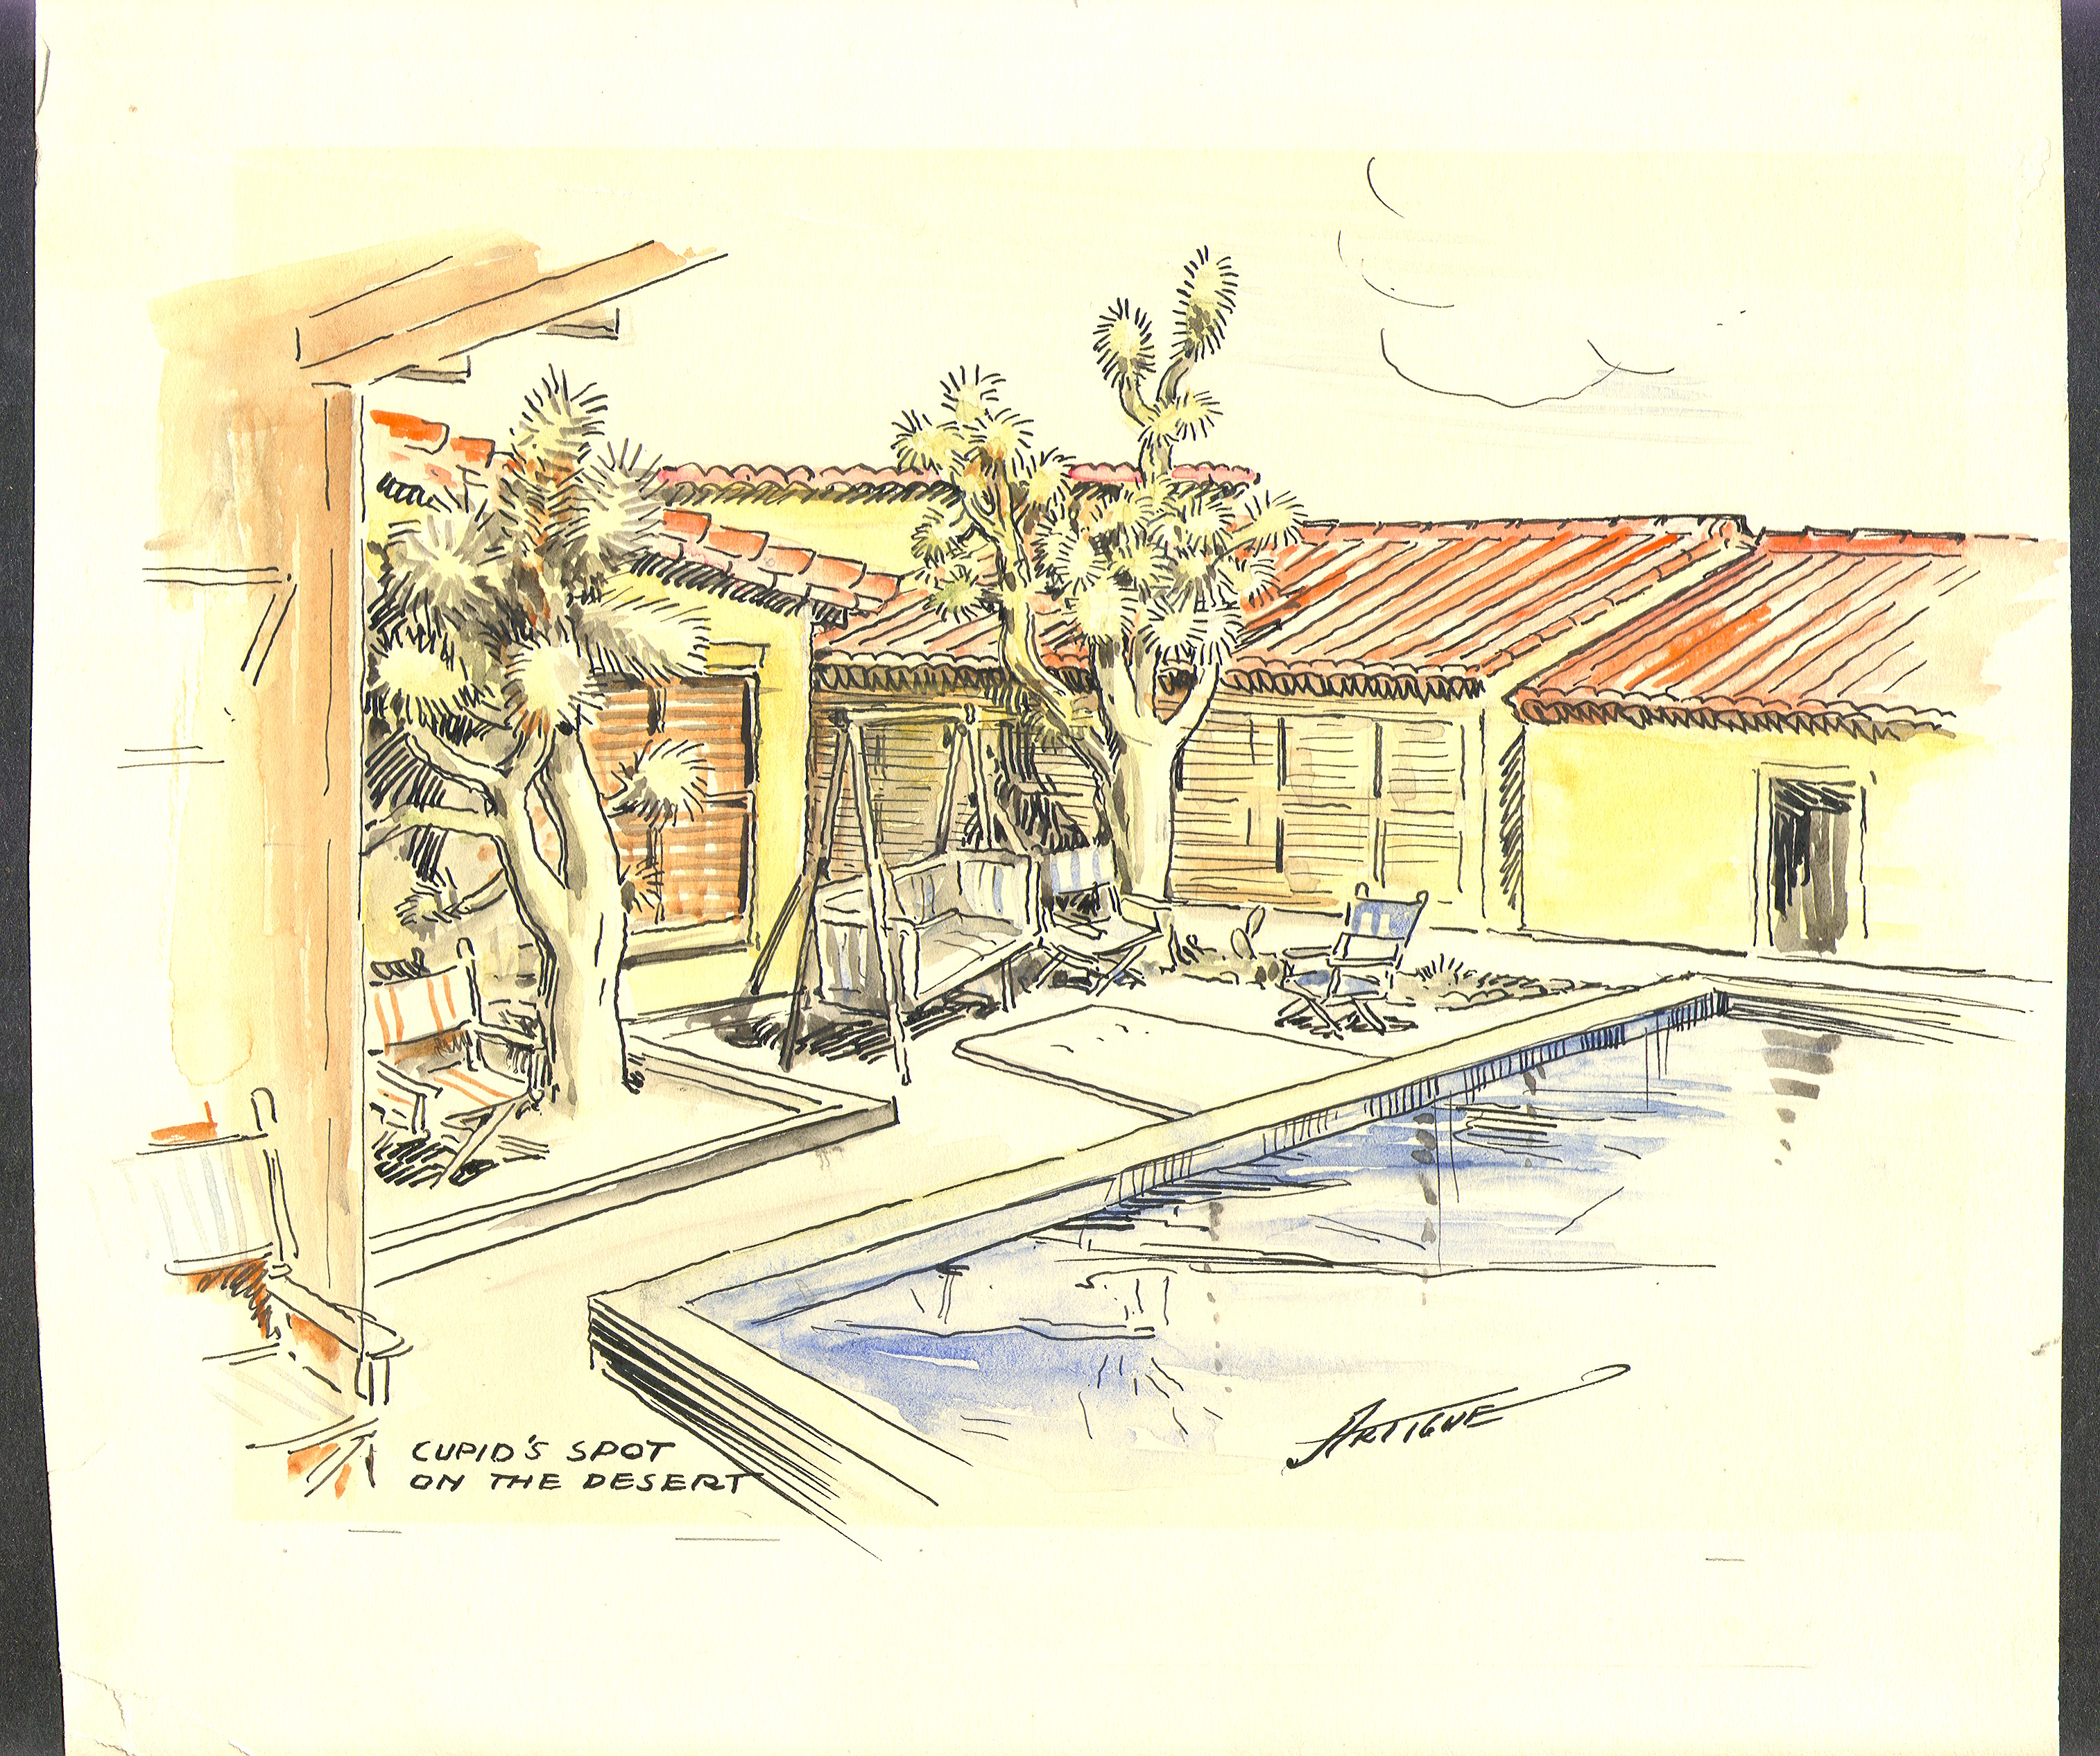 Pastel sketch of the swimming pool at the ranch. "Cupid's Spot on the Desert": design drawings